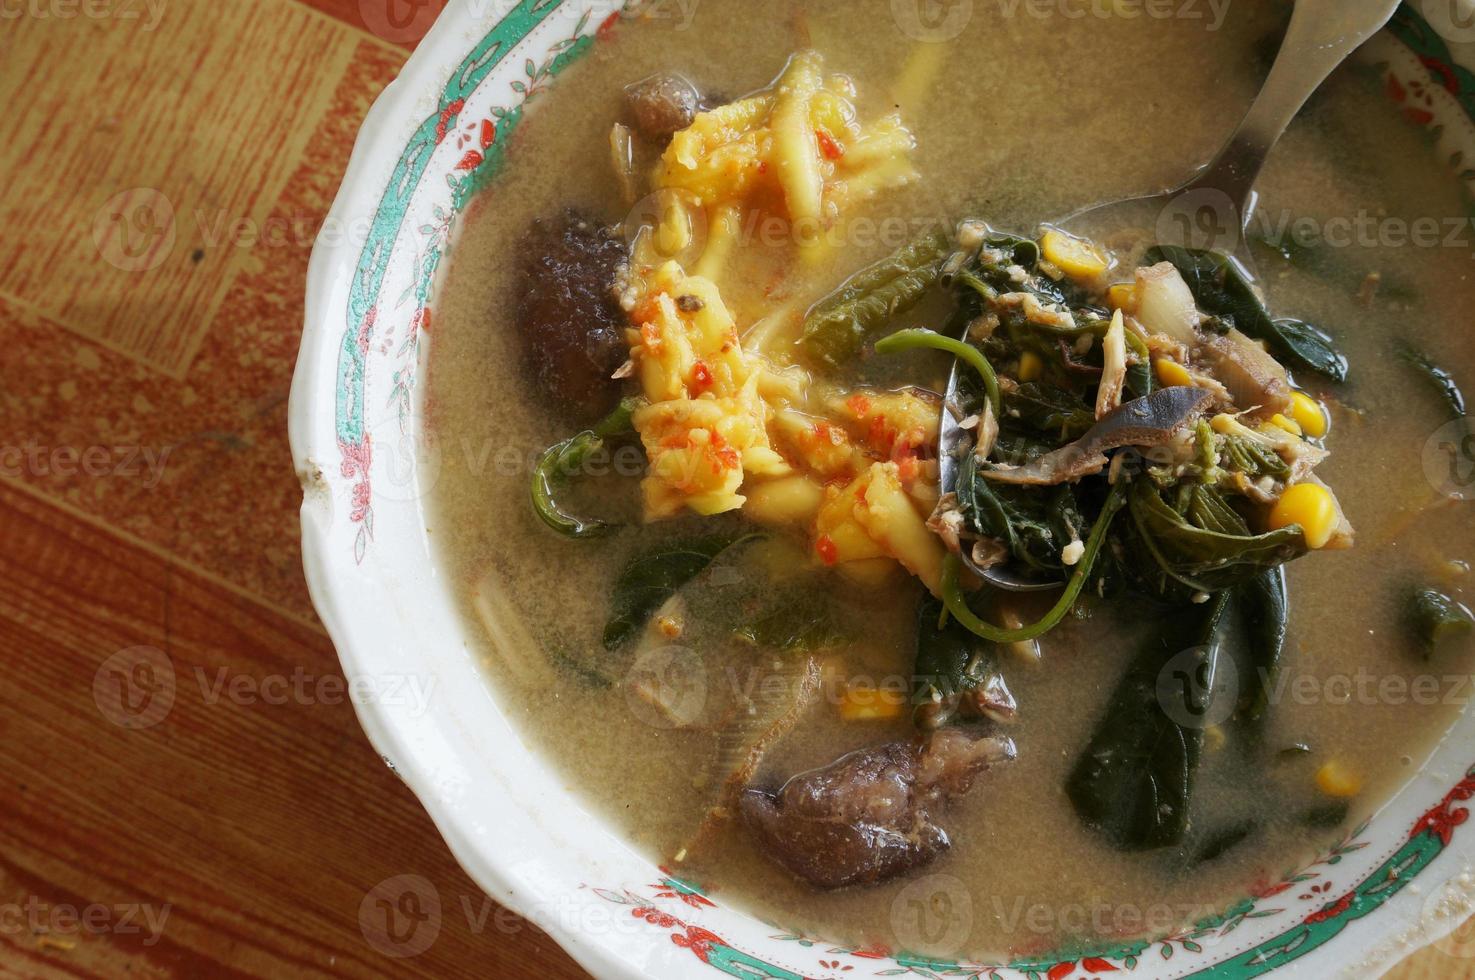 Kapurung. Kapurung is a culinary origin of South Sulawesi, indonesia. Kapurung made from sago, vegetables and fish. photo